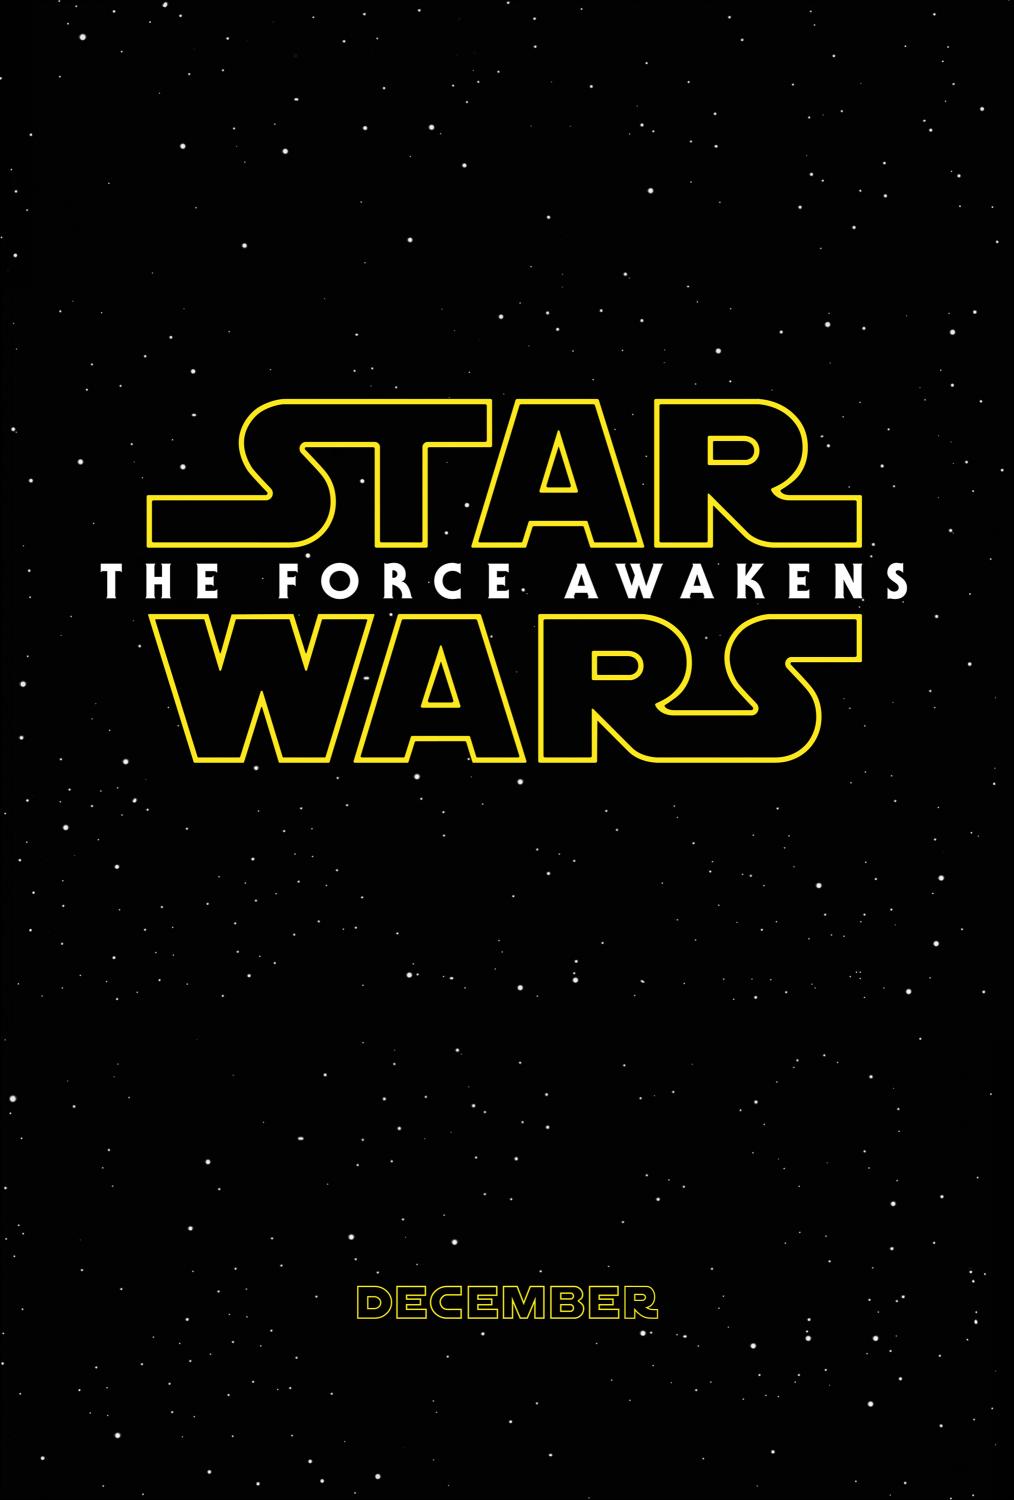 Star Wars, The Force Awakens, Coming to Theaters December, 2015